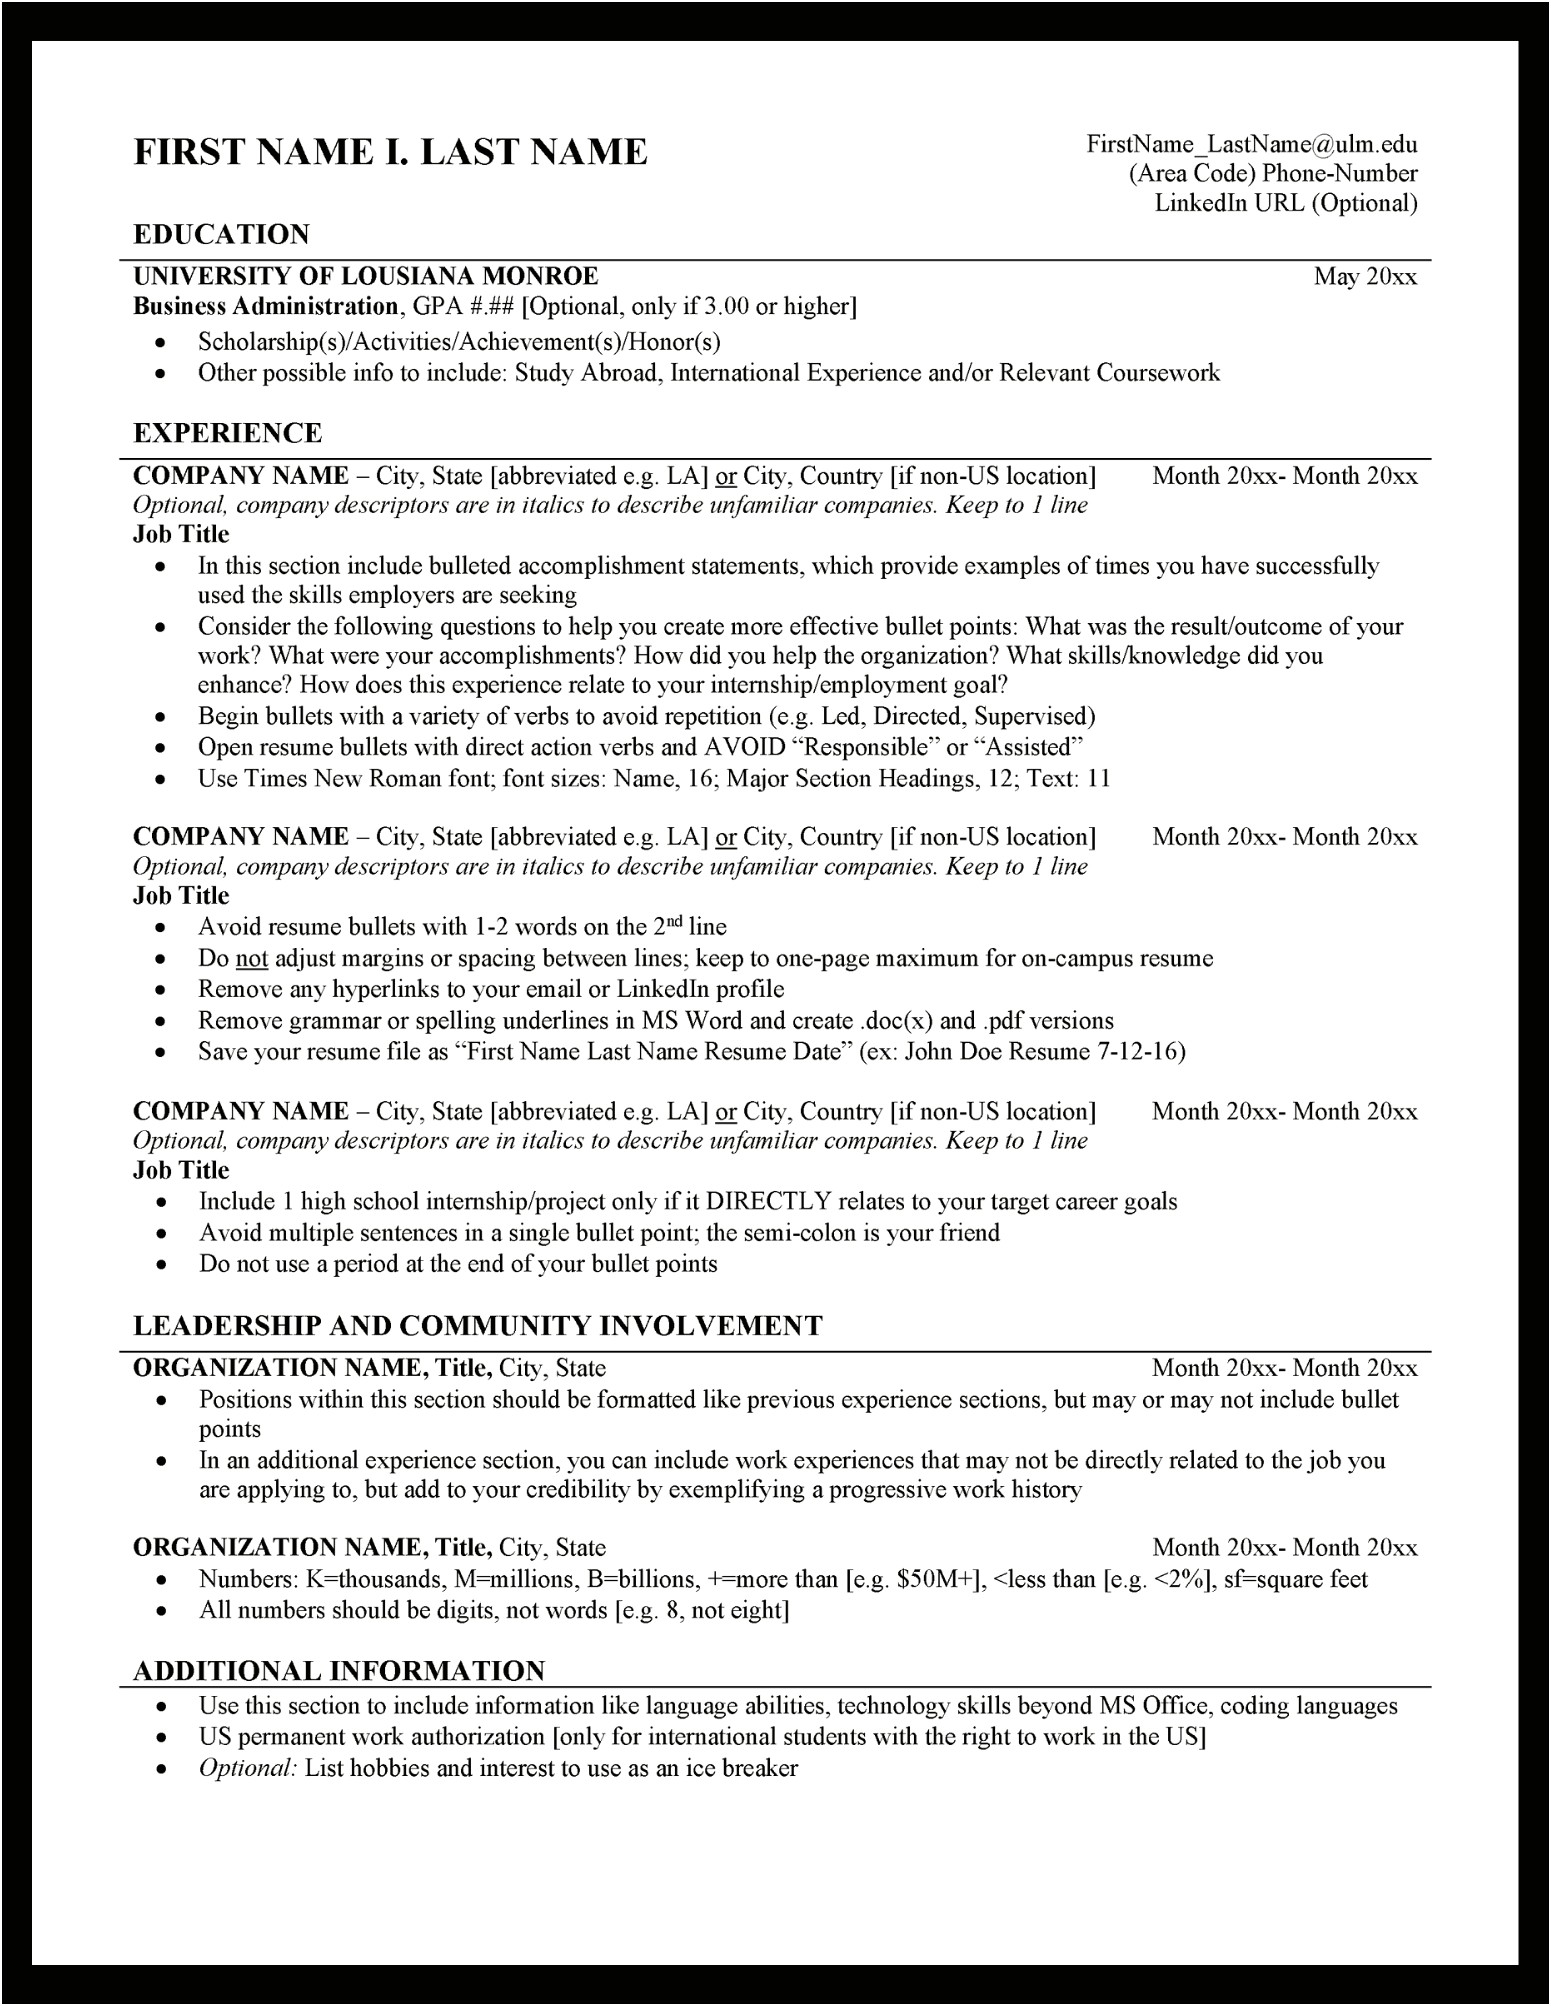 Resume For College Student With Work Experience